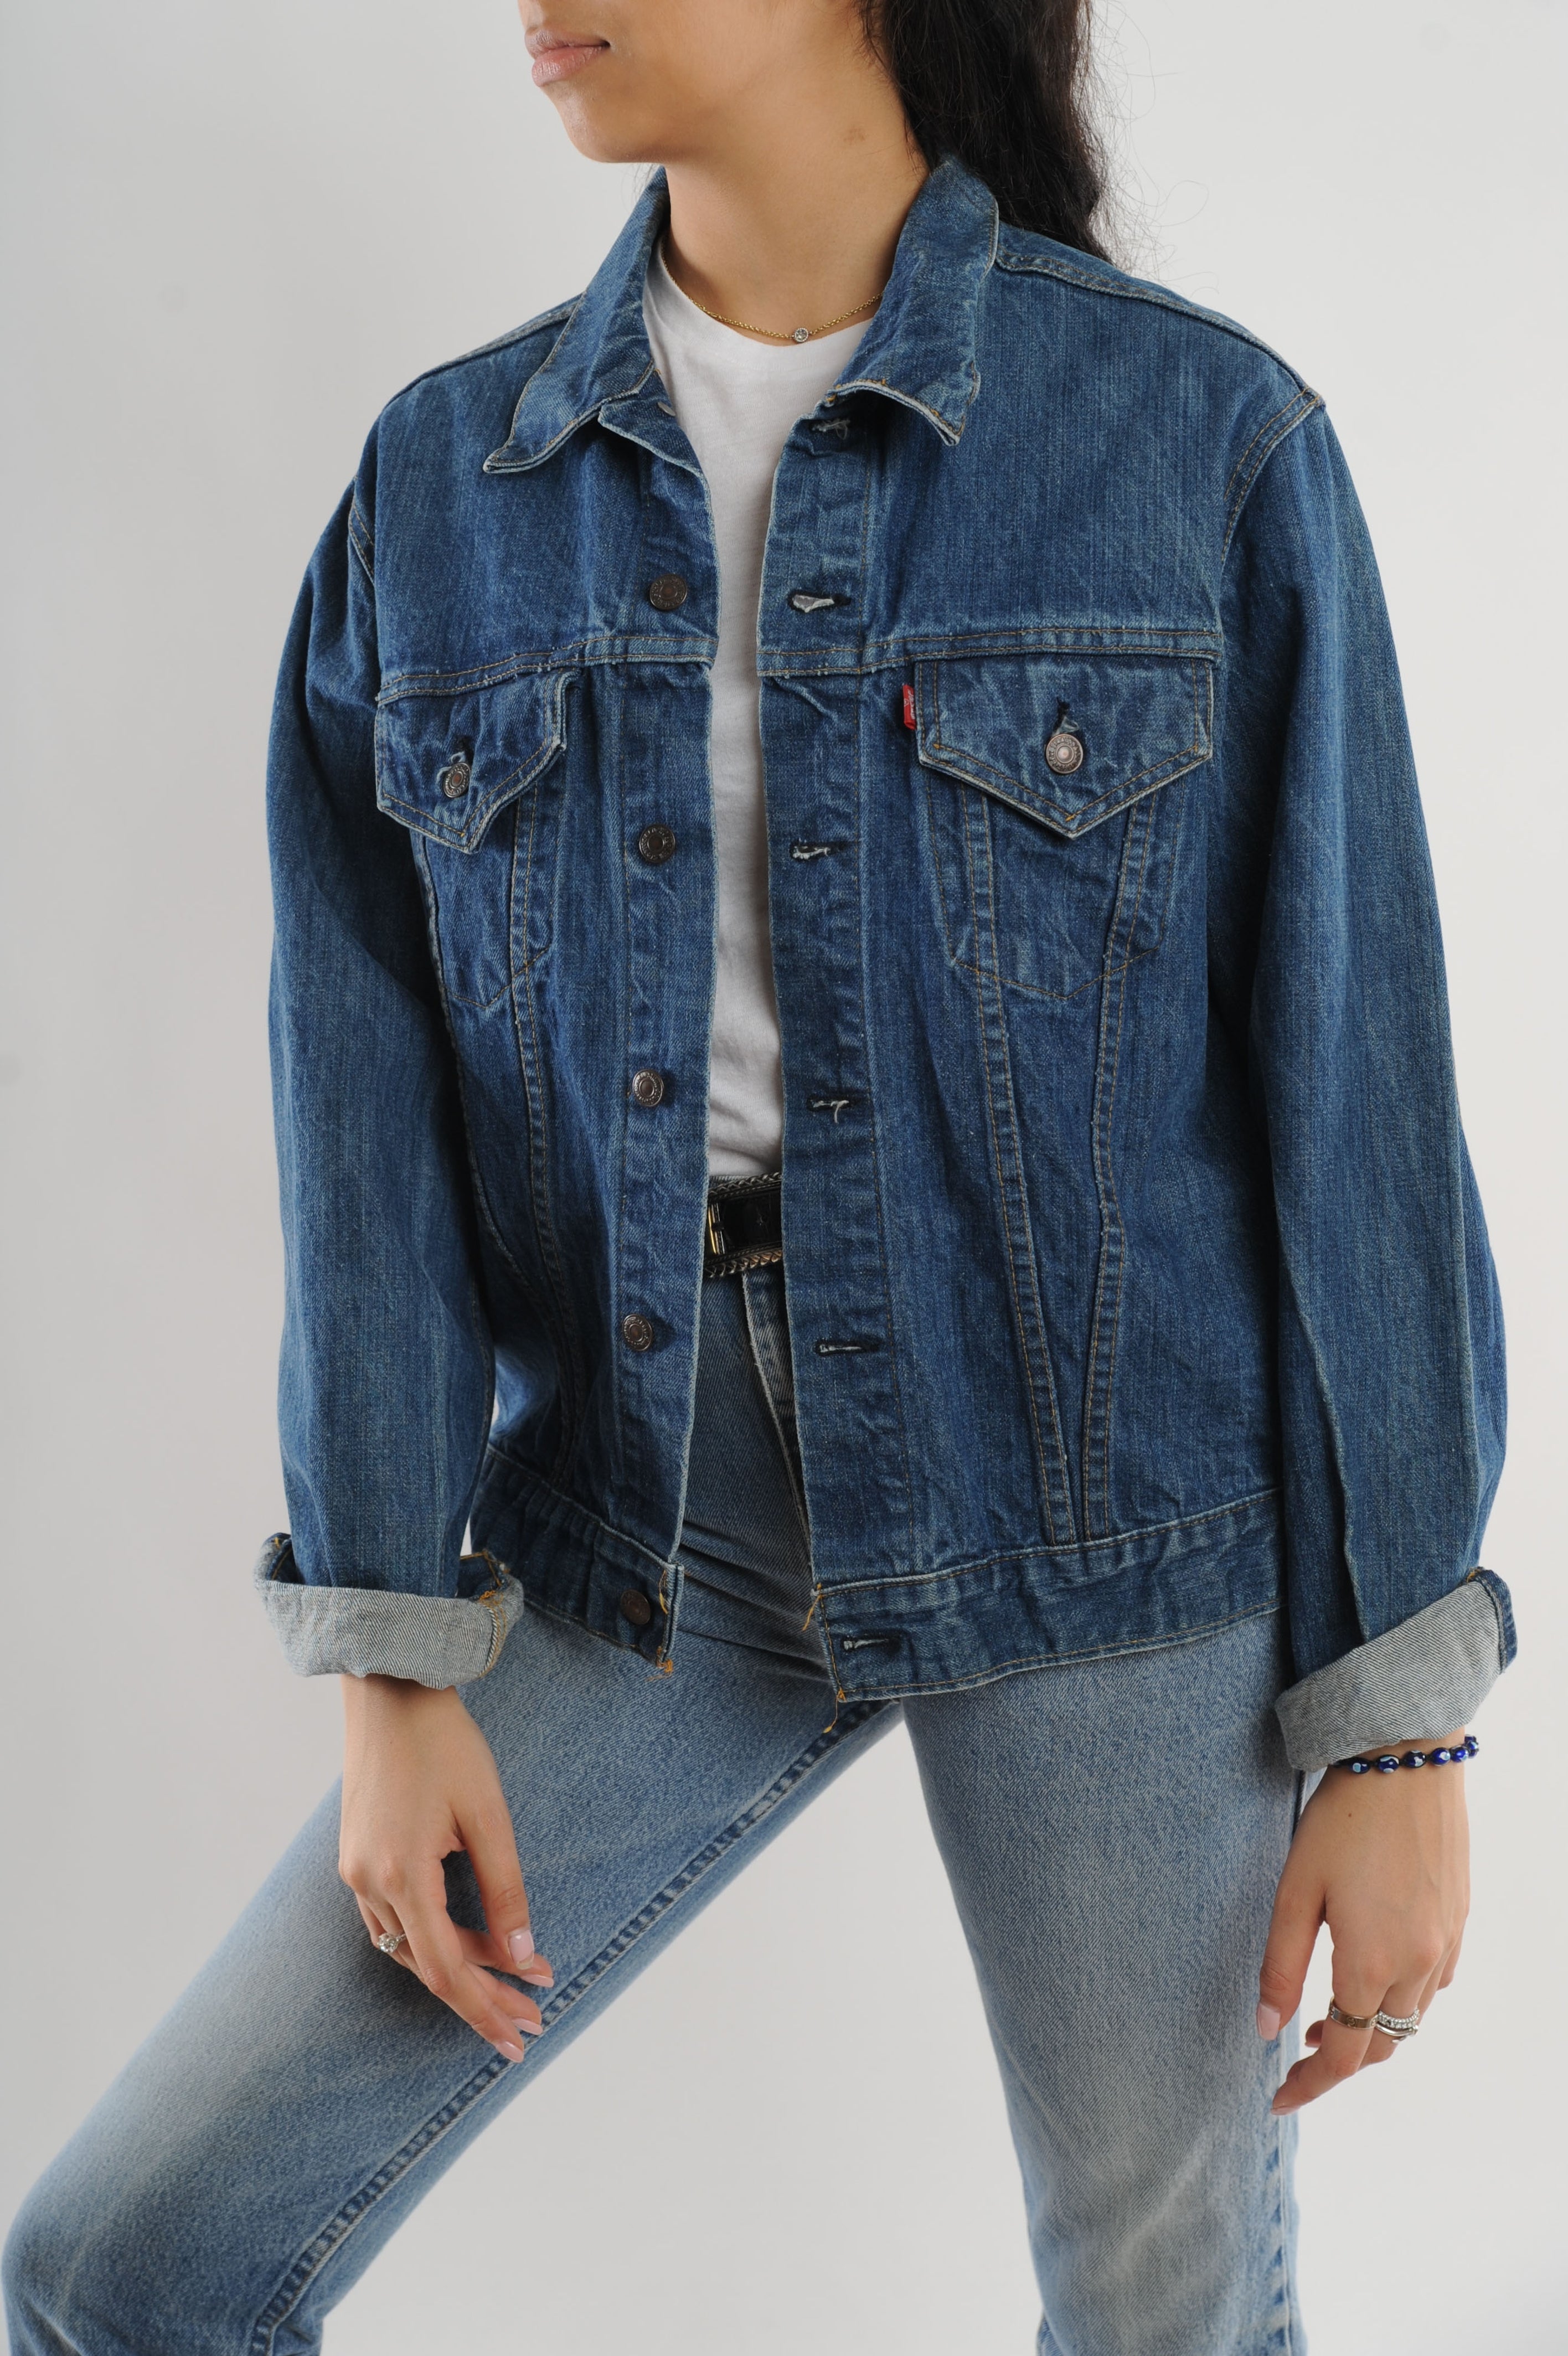 Levi's Denim Jacket Free Shipping - The Vintage Twin